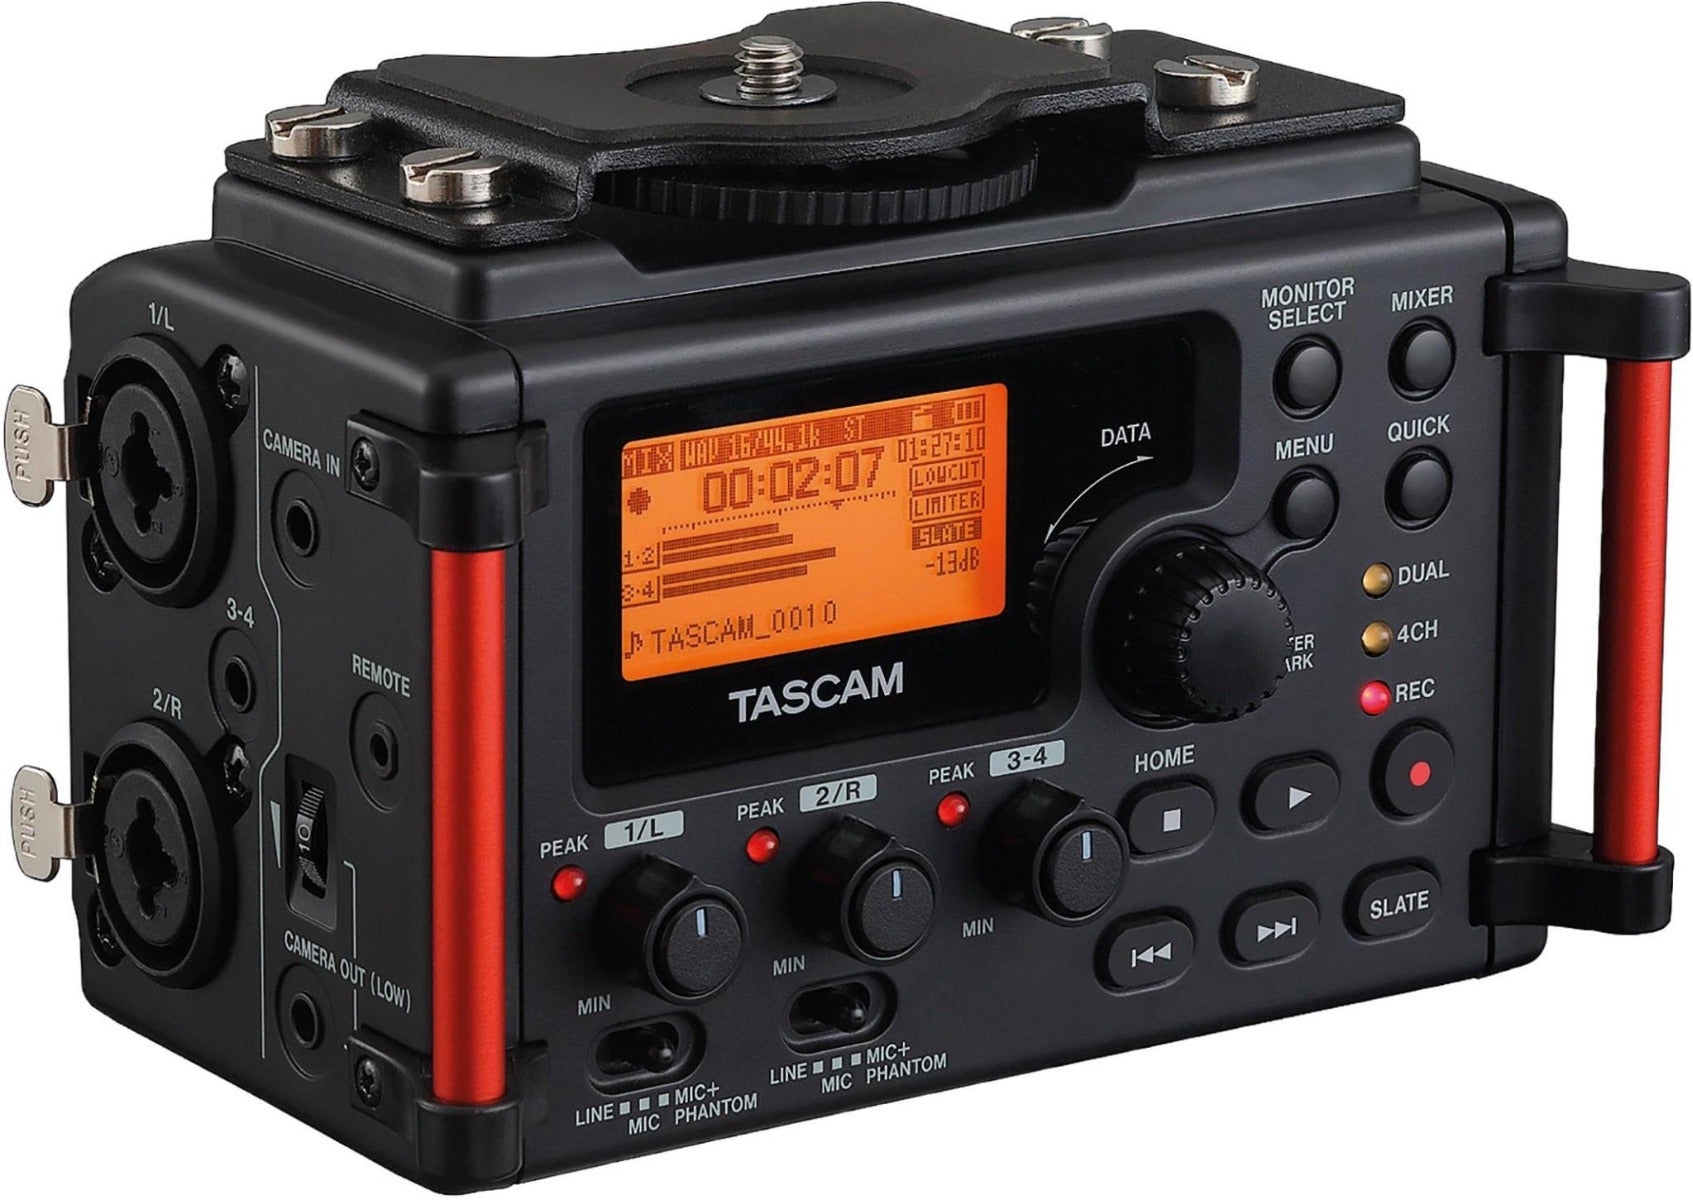 Product Image of Tascam DR-60DMKII – Portable linear PCM Stereo Recorder